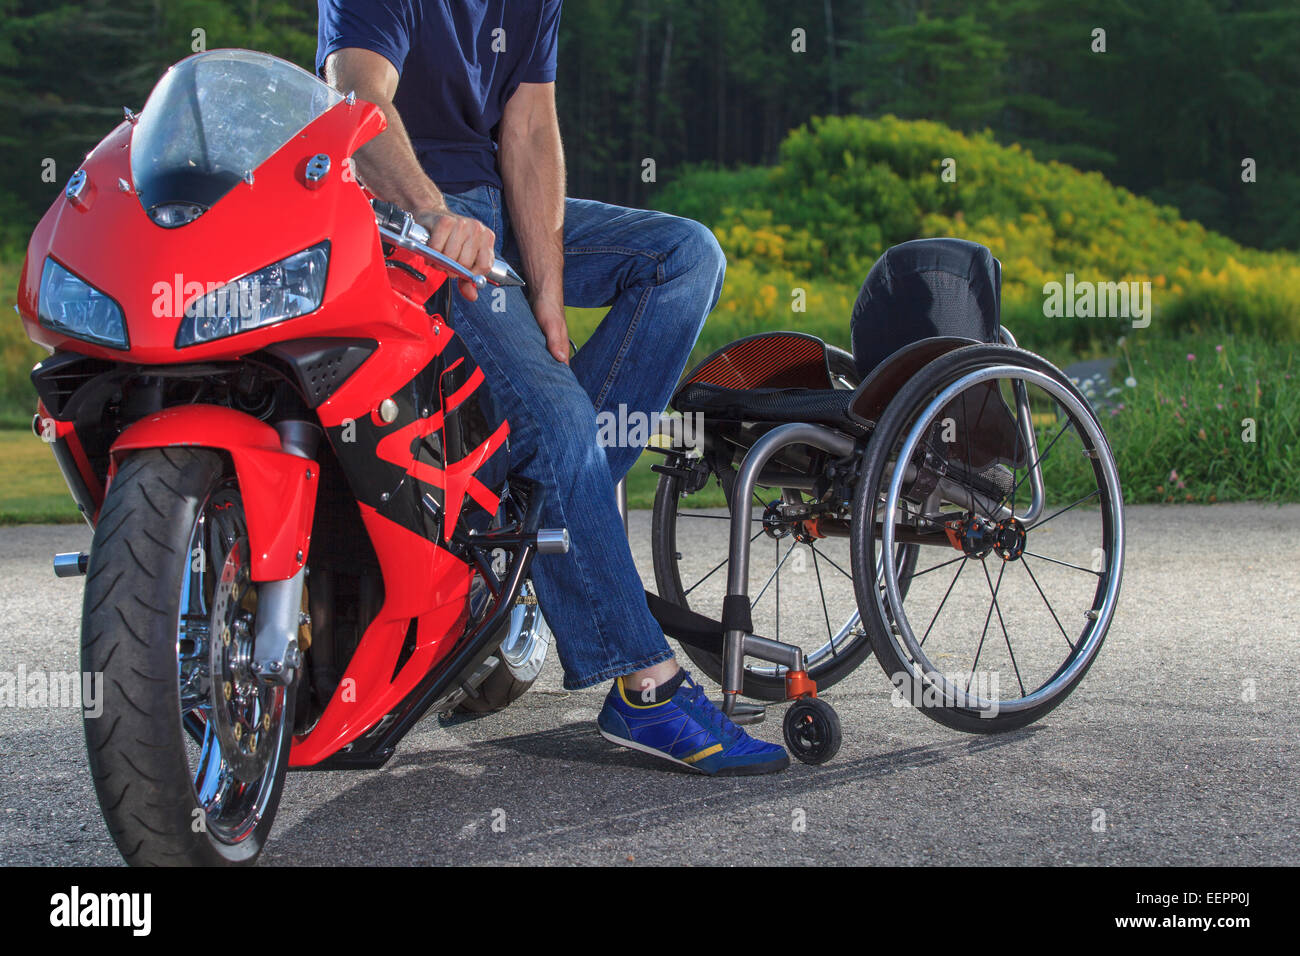 Man with spinal cord injury on his custom adaptive motorcycle Stock Photo